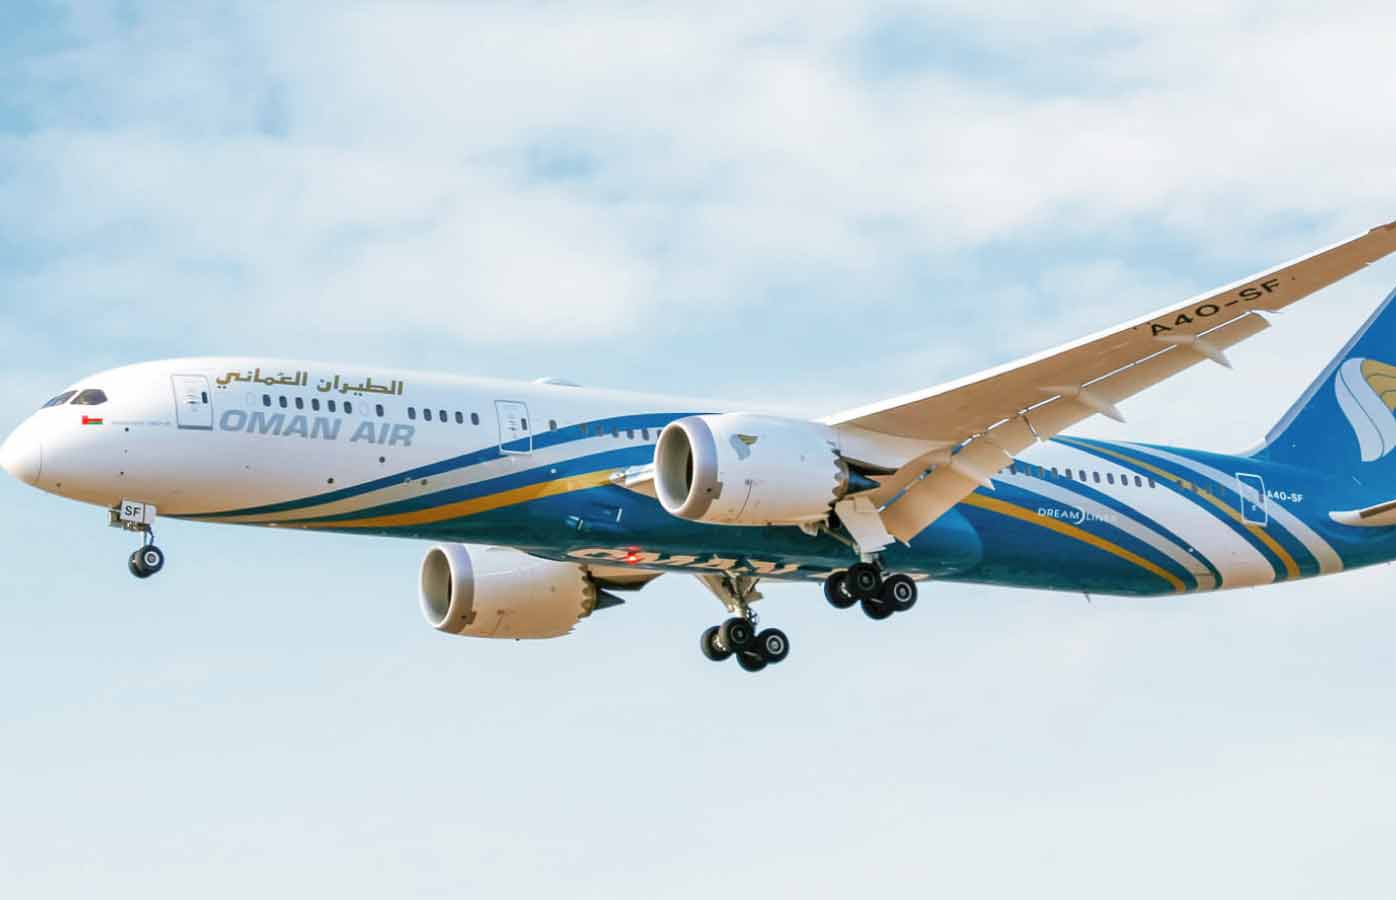 Oman Air - Future oneworld Member Airline